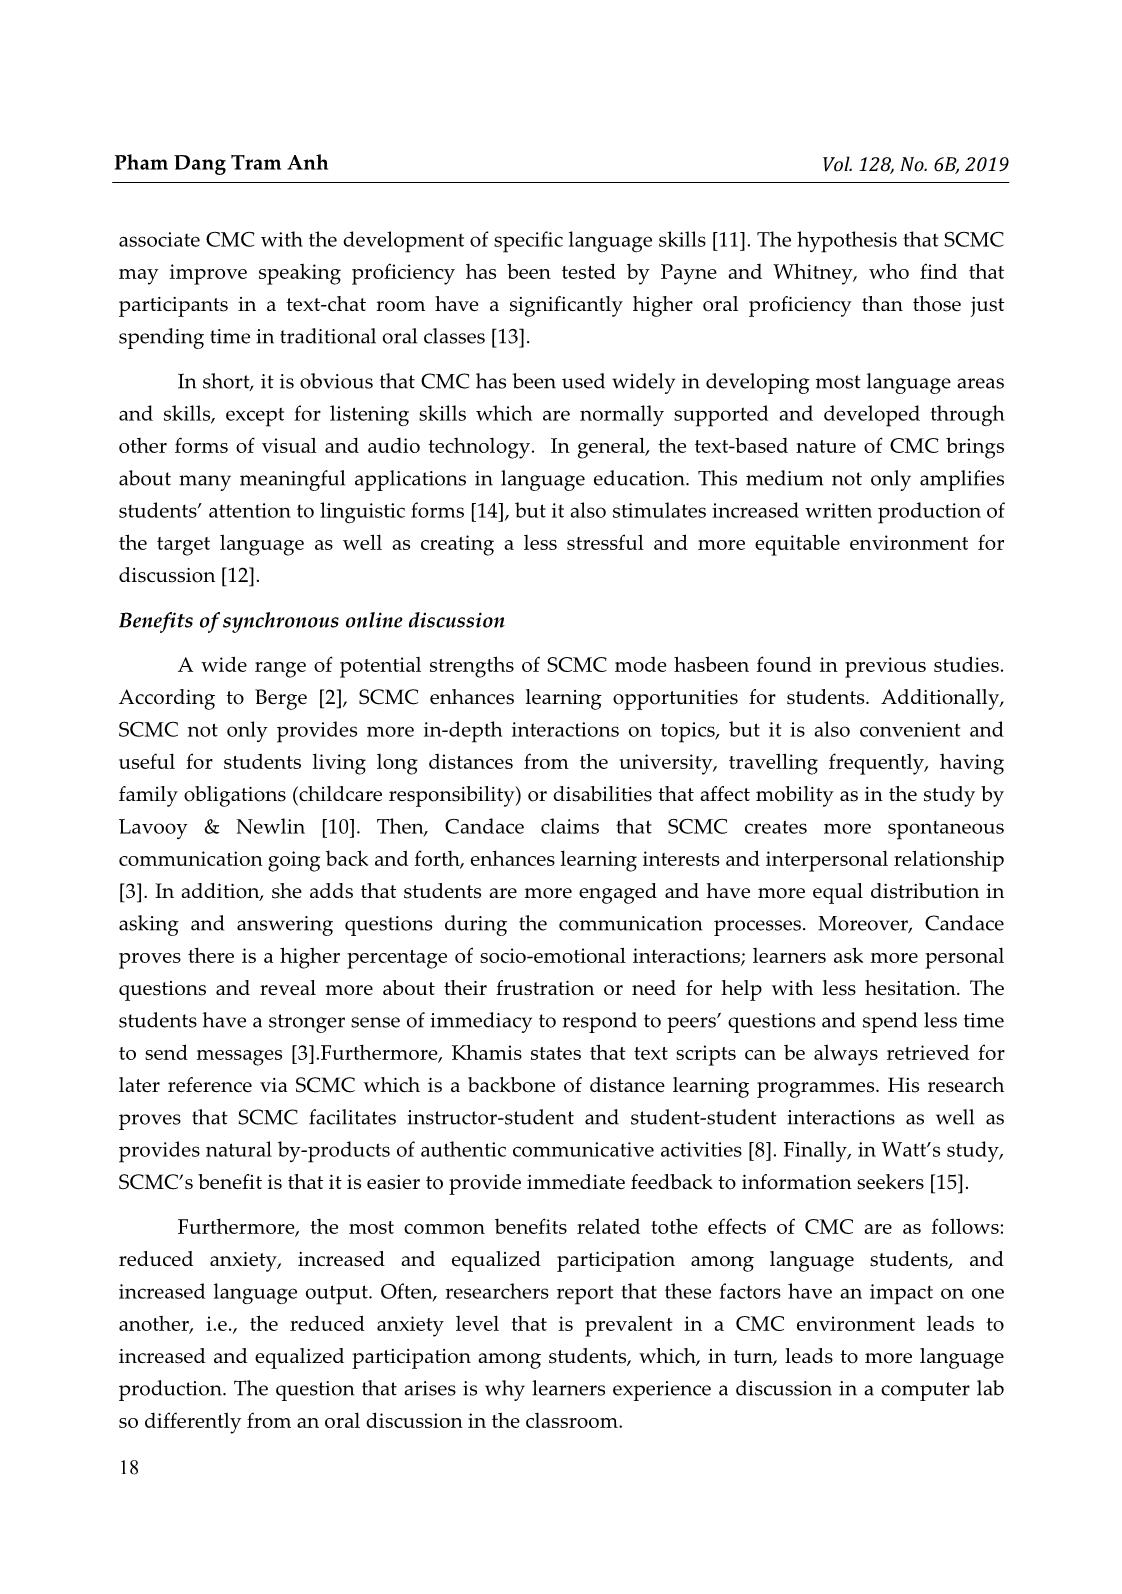 Quantitative analysis of the effect of synchronous online discussions on oral and written language development for efl university students in Vietnam trang 3